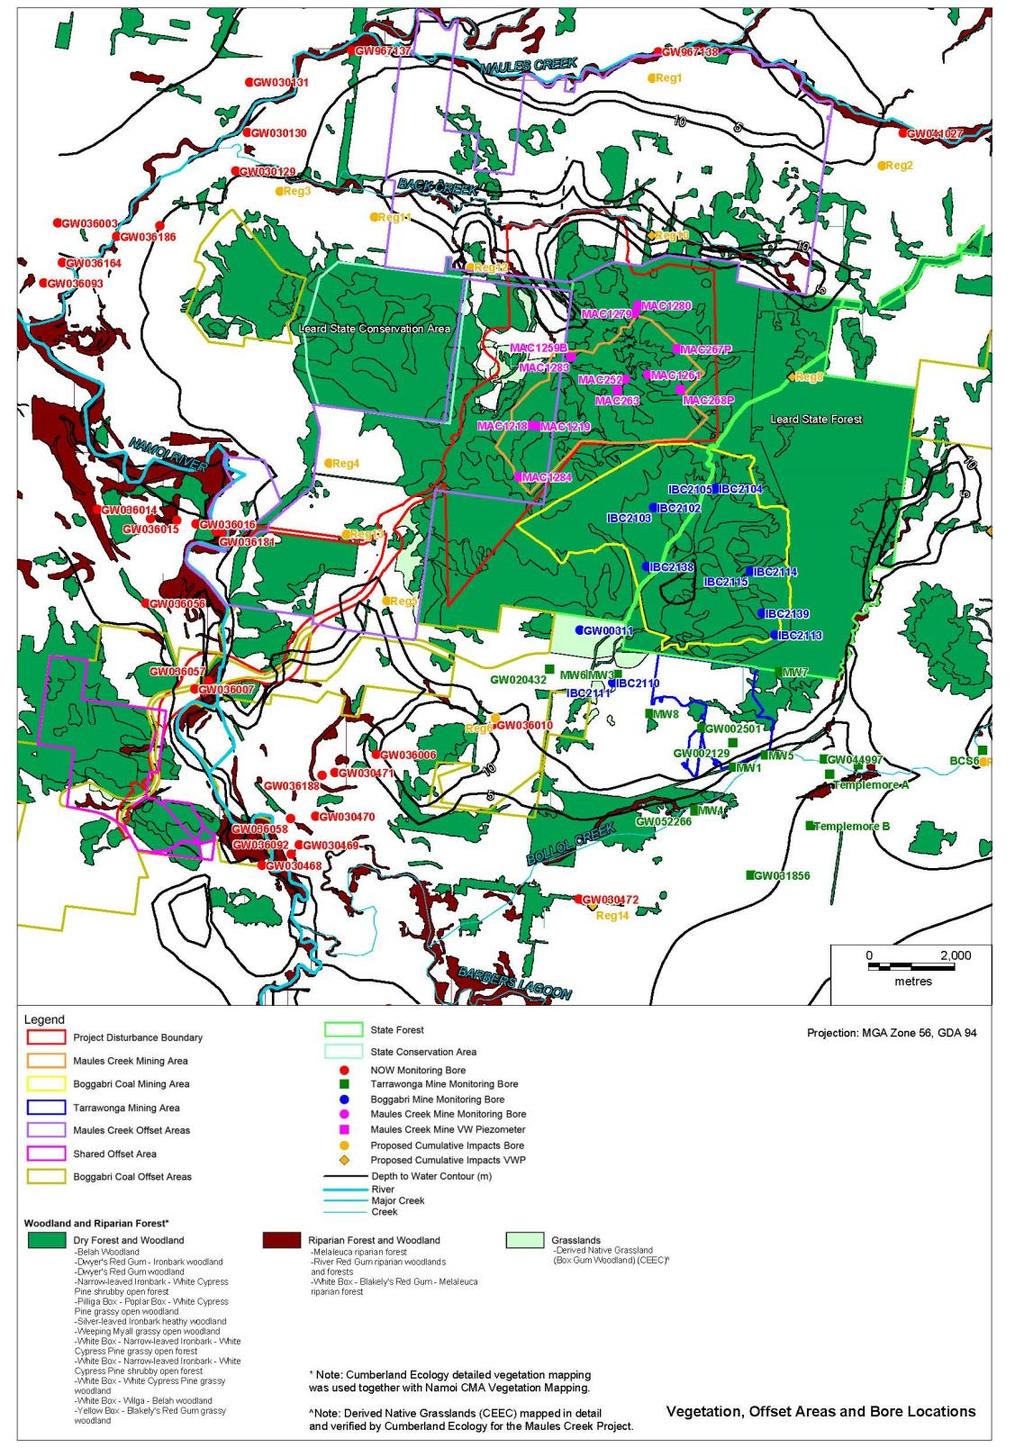 Figure G2: Vegetation, Offsets Areas and